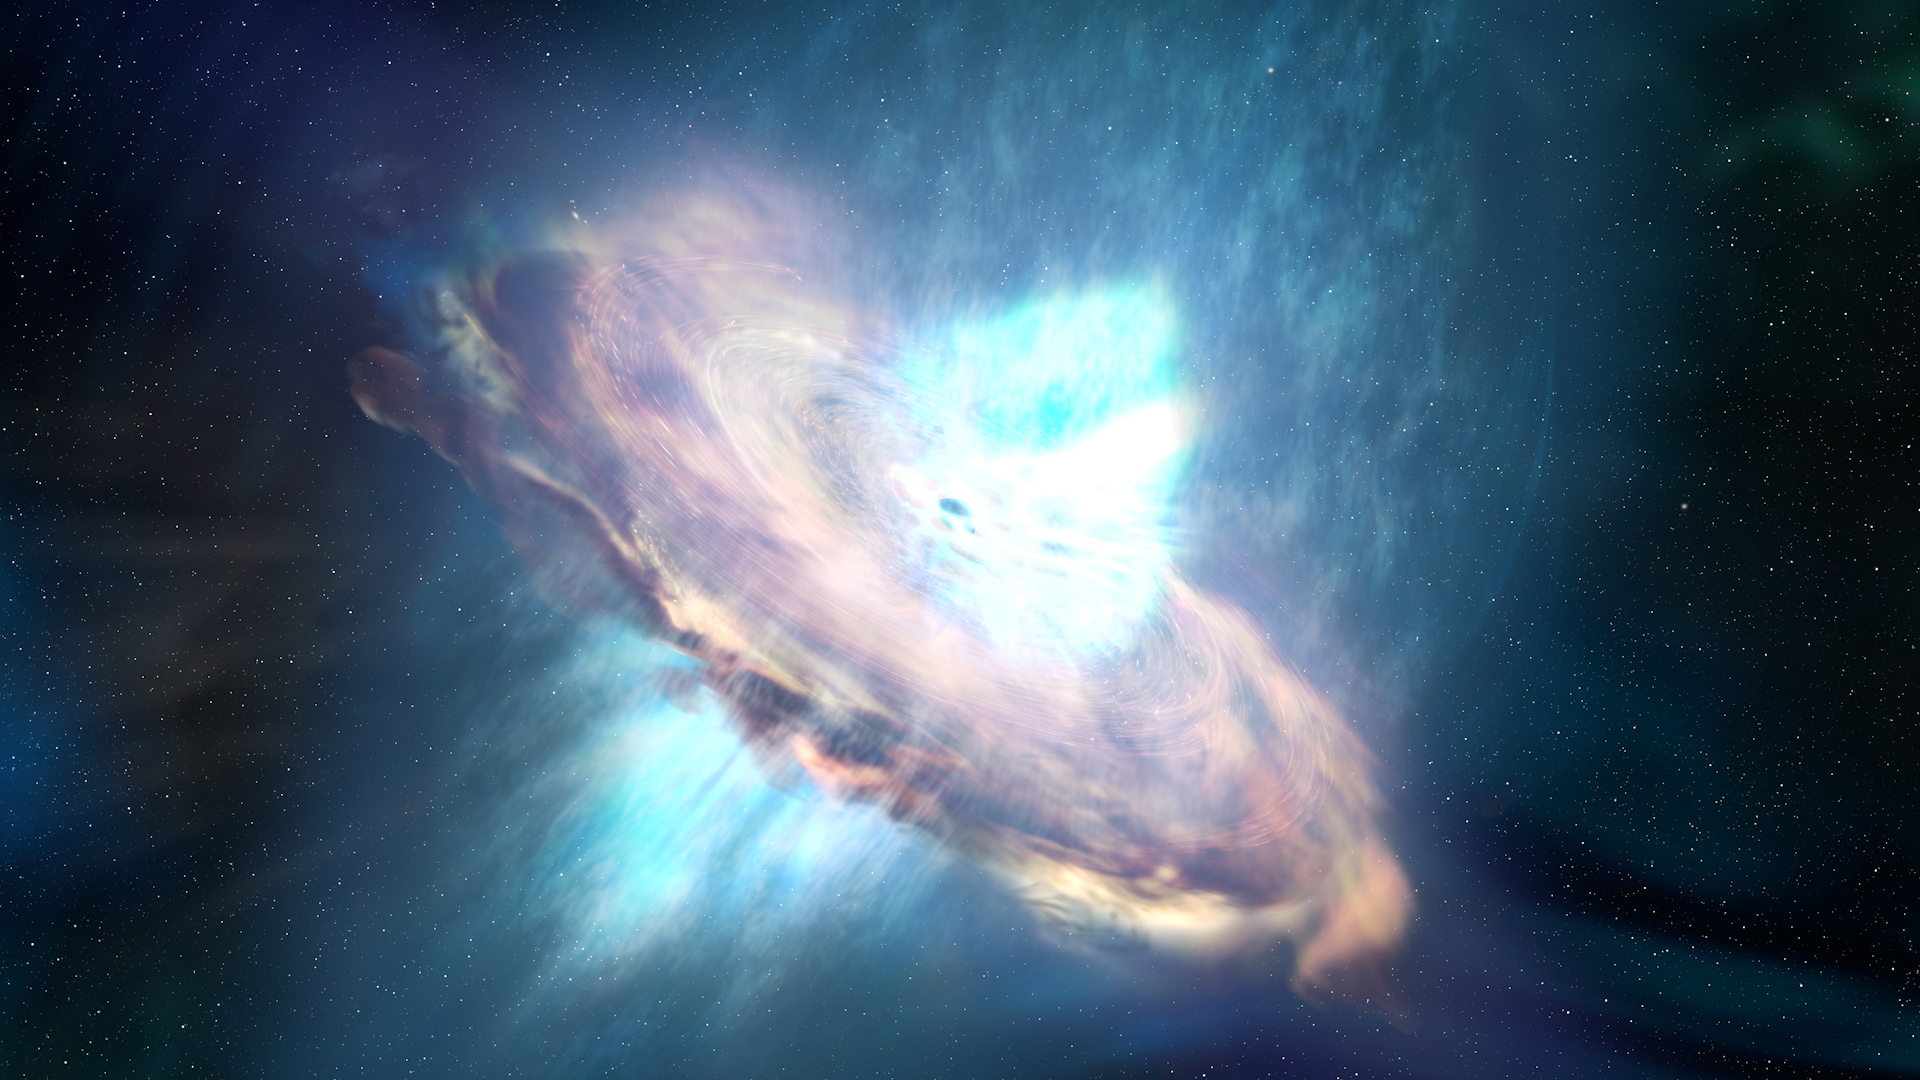 Explore the unusual eruption of 1ES 1927+654, a galaxy located 236 million light-years away in the constellation Draco. A sudden reversal of the magnetic field around its million-solar-mass black hole may have triggered the outburst.Credit: NASA’s Goddard Space Flight Center Music: "Water Dance" and "Alternate Worlds" from Universal Production MusicWatch this video on the NASA Goddard YouTube channel.Complete transcript available.